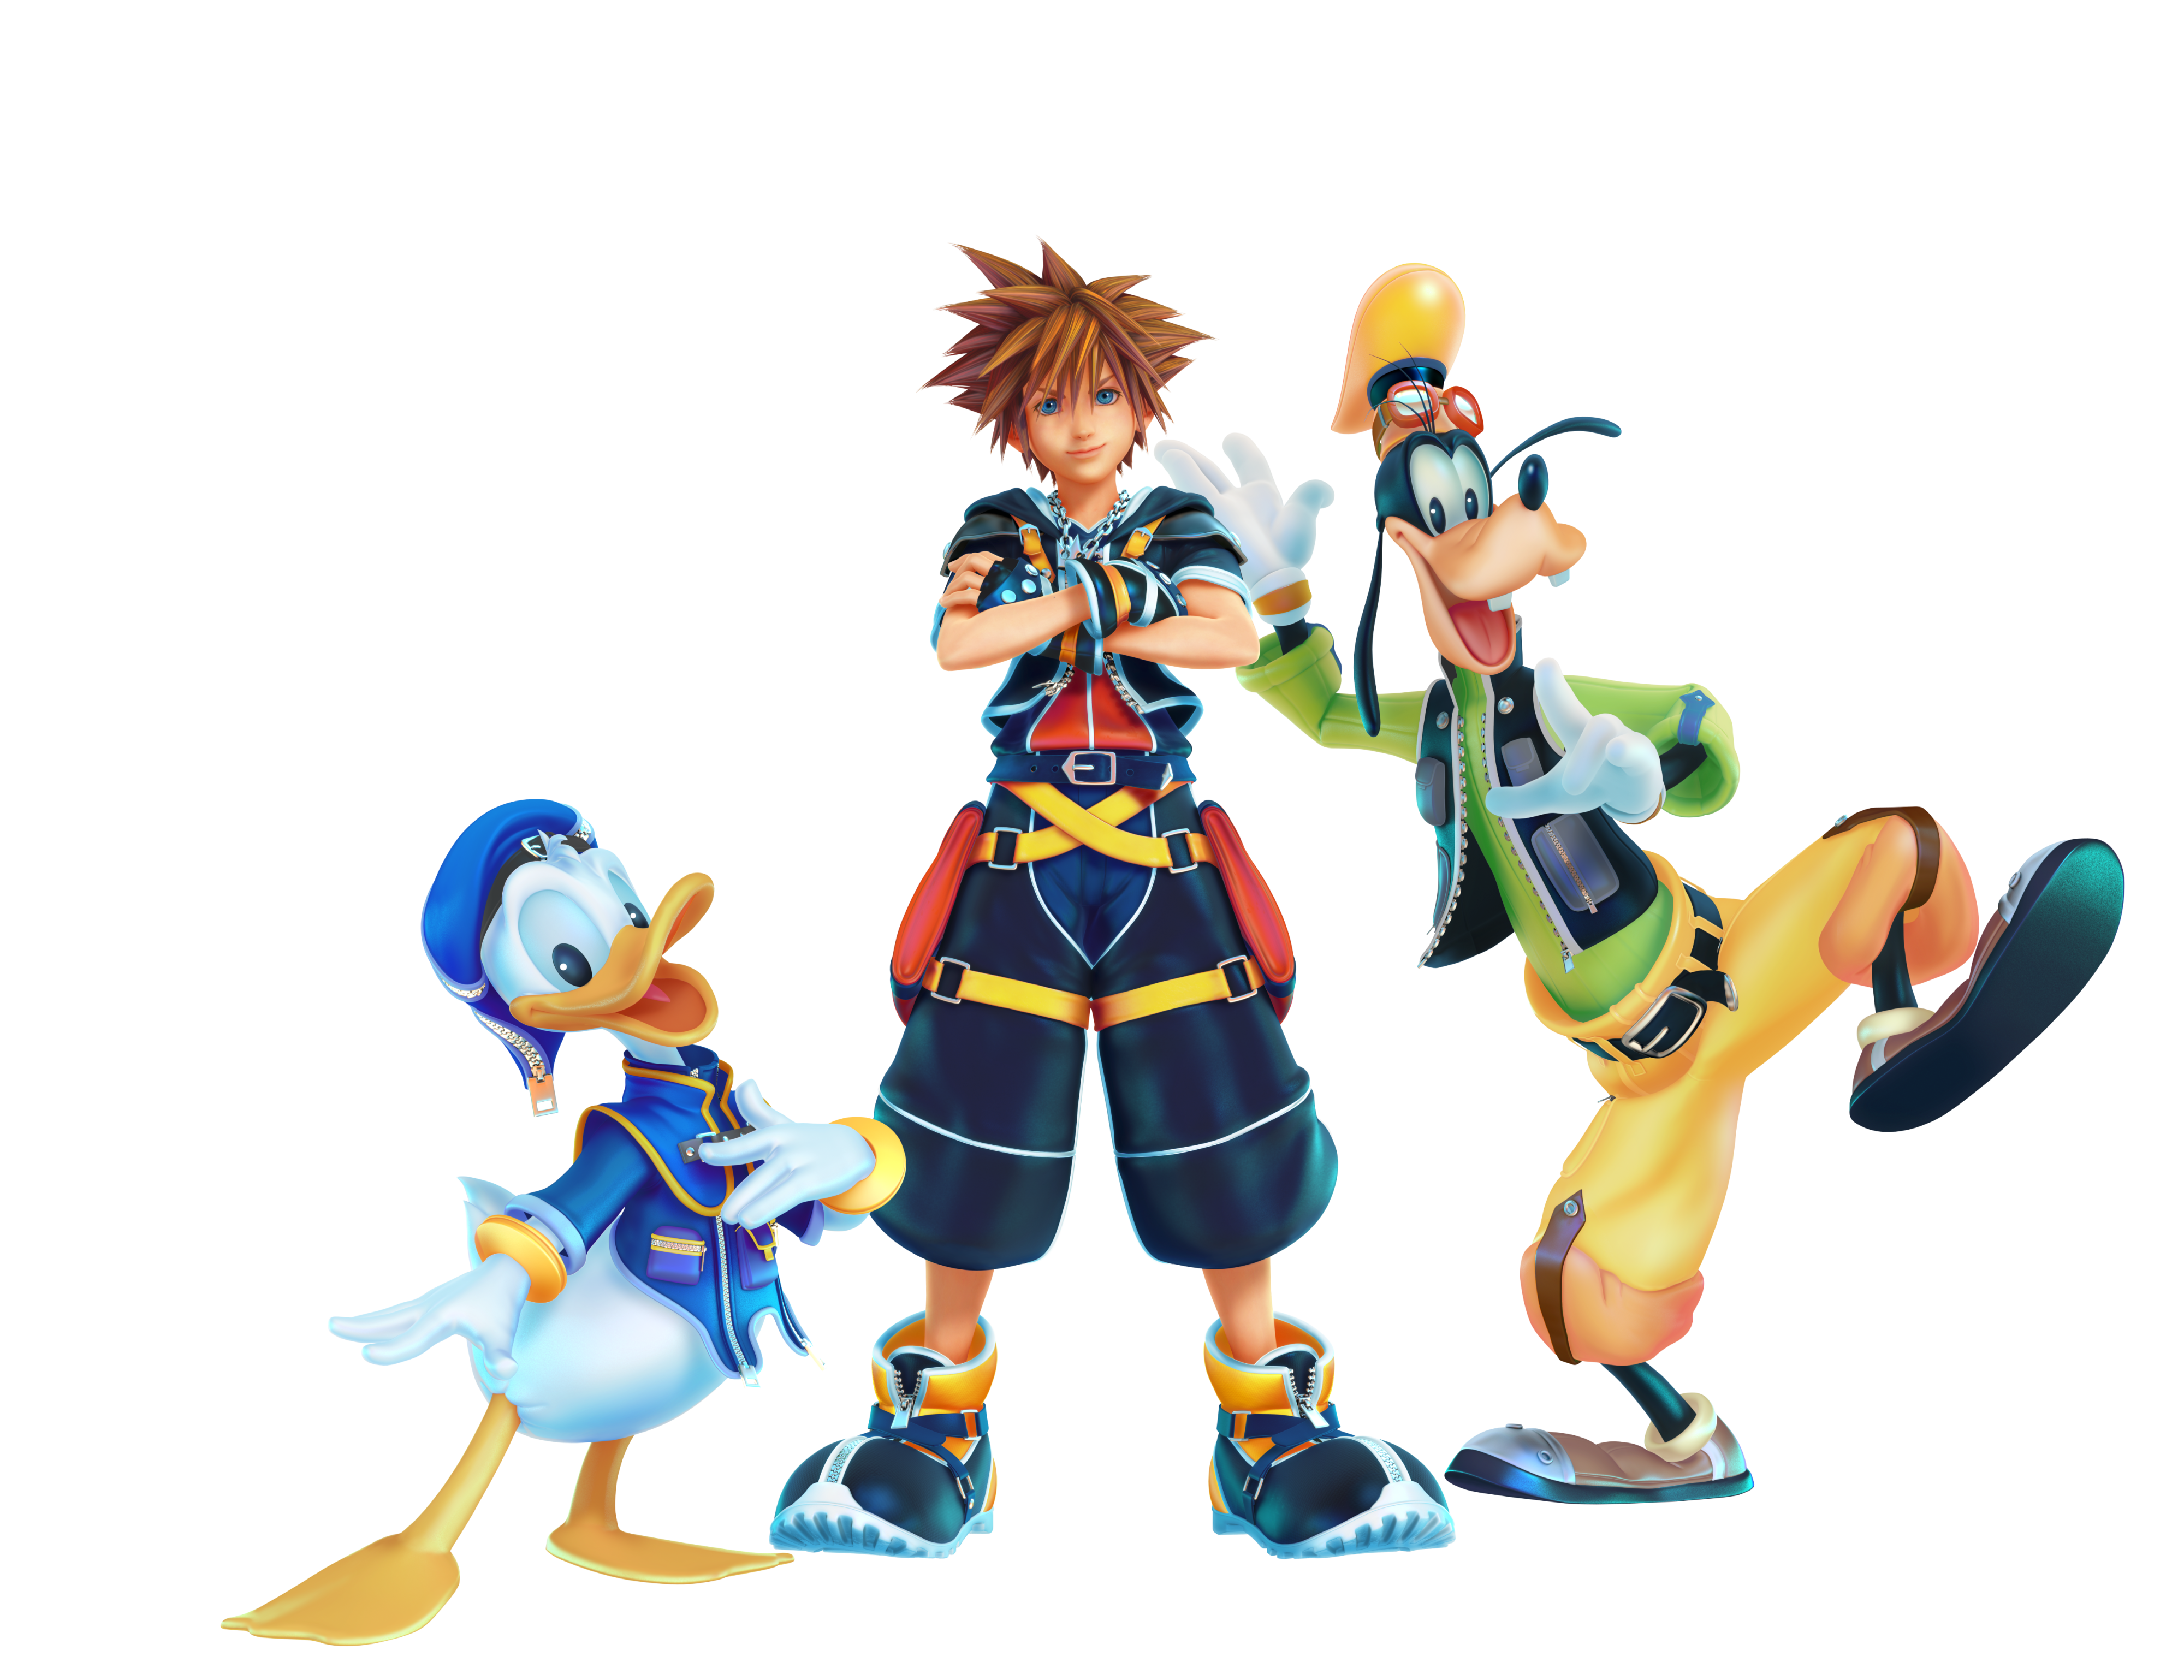 Kingdom Hearts III Backgrounds, Compatible - PC, Mobile, Gadgets| 4000x3077 px